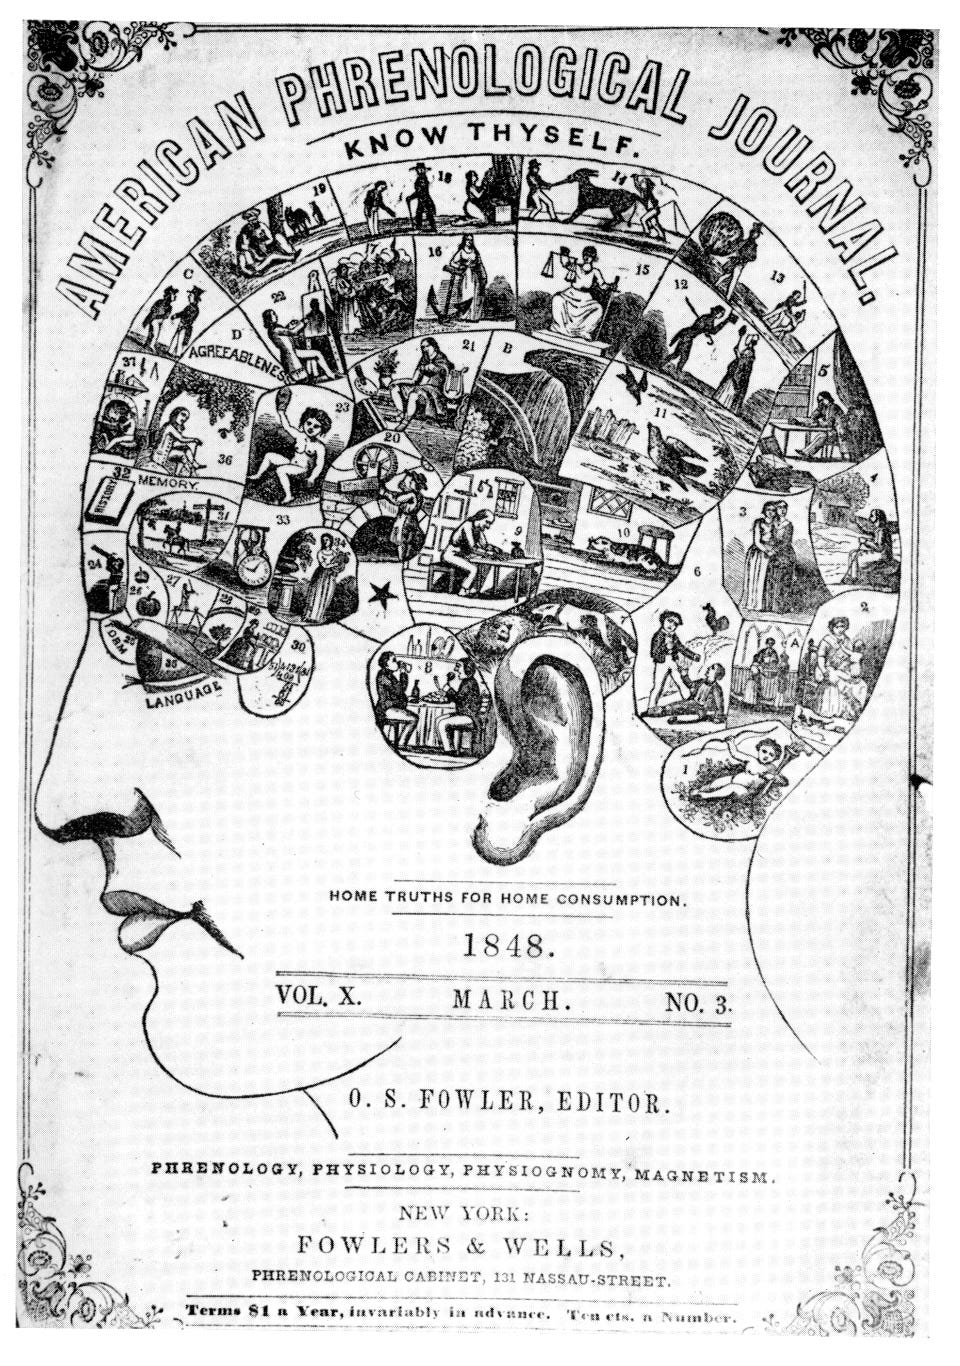 Materials of the Mind: Phrenology, Race, and the Global History of